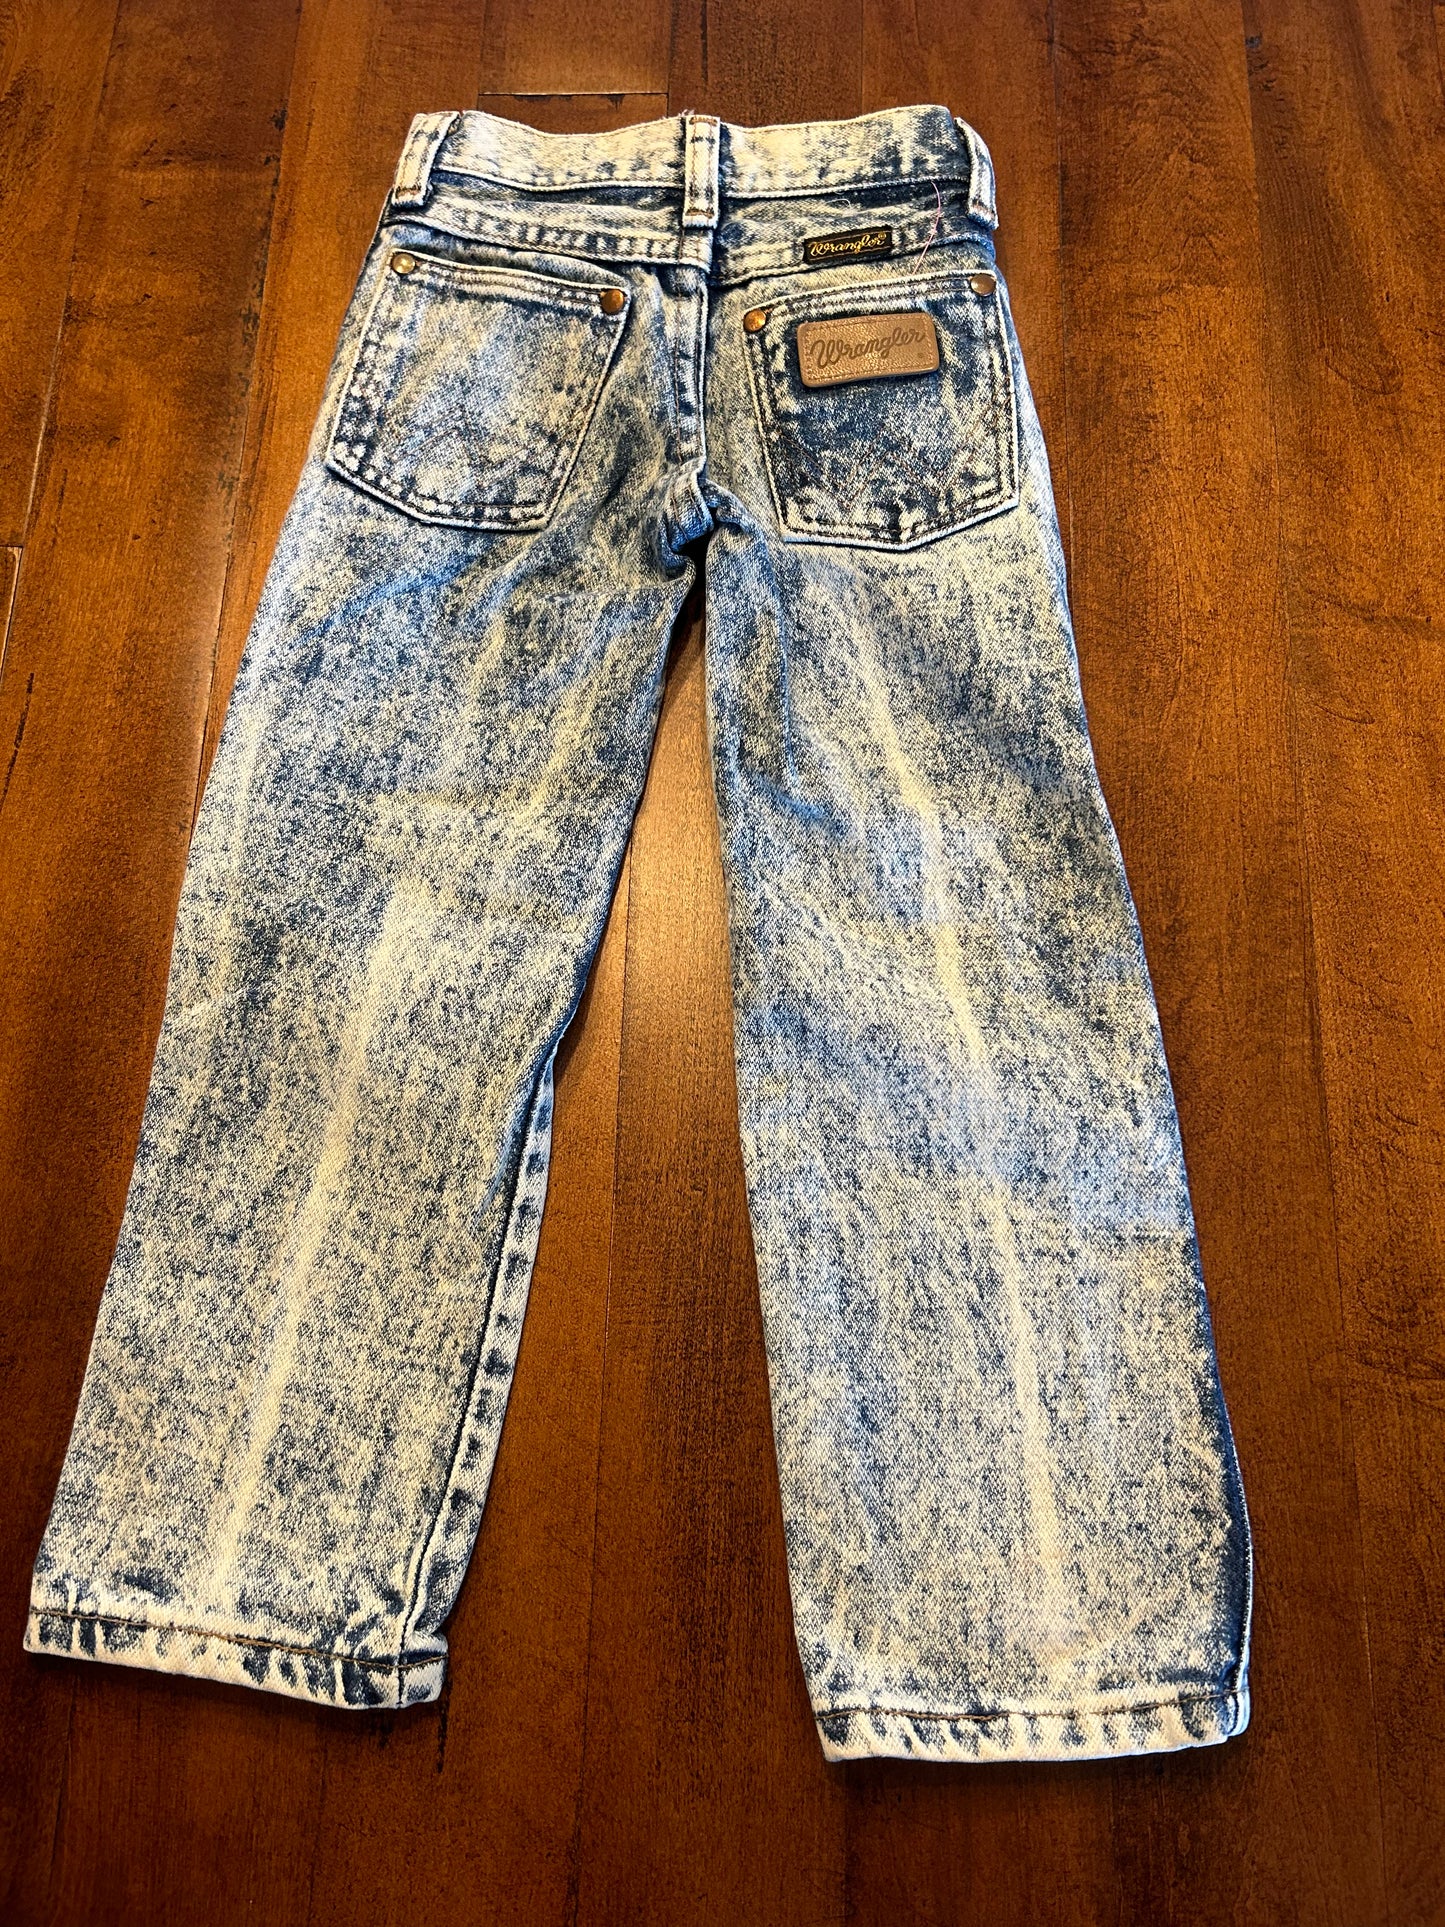 Vintage Wrangler Acid Wash Toddler Jeans from the 80’s Size 3T